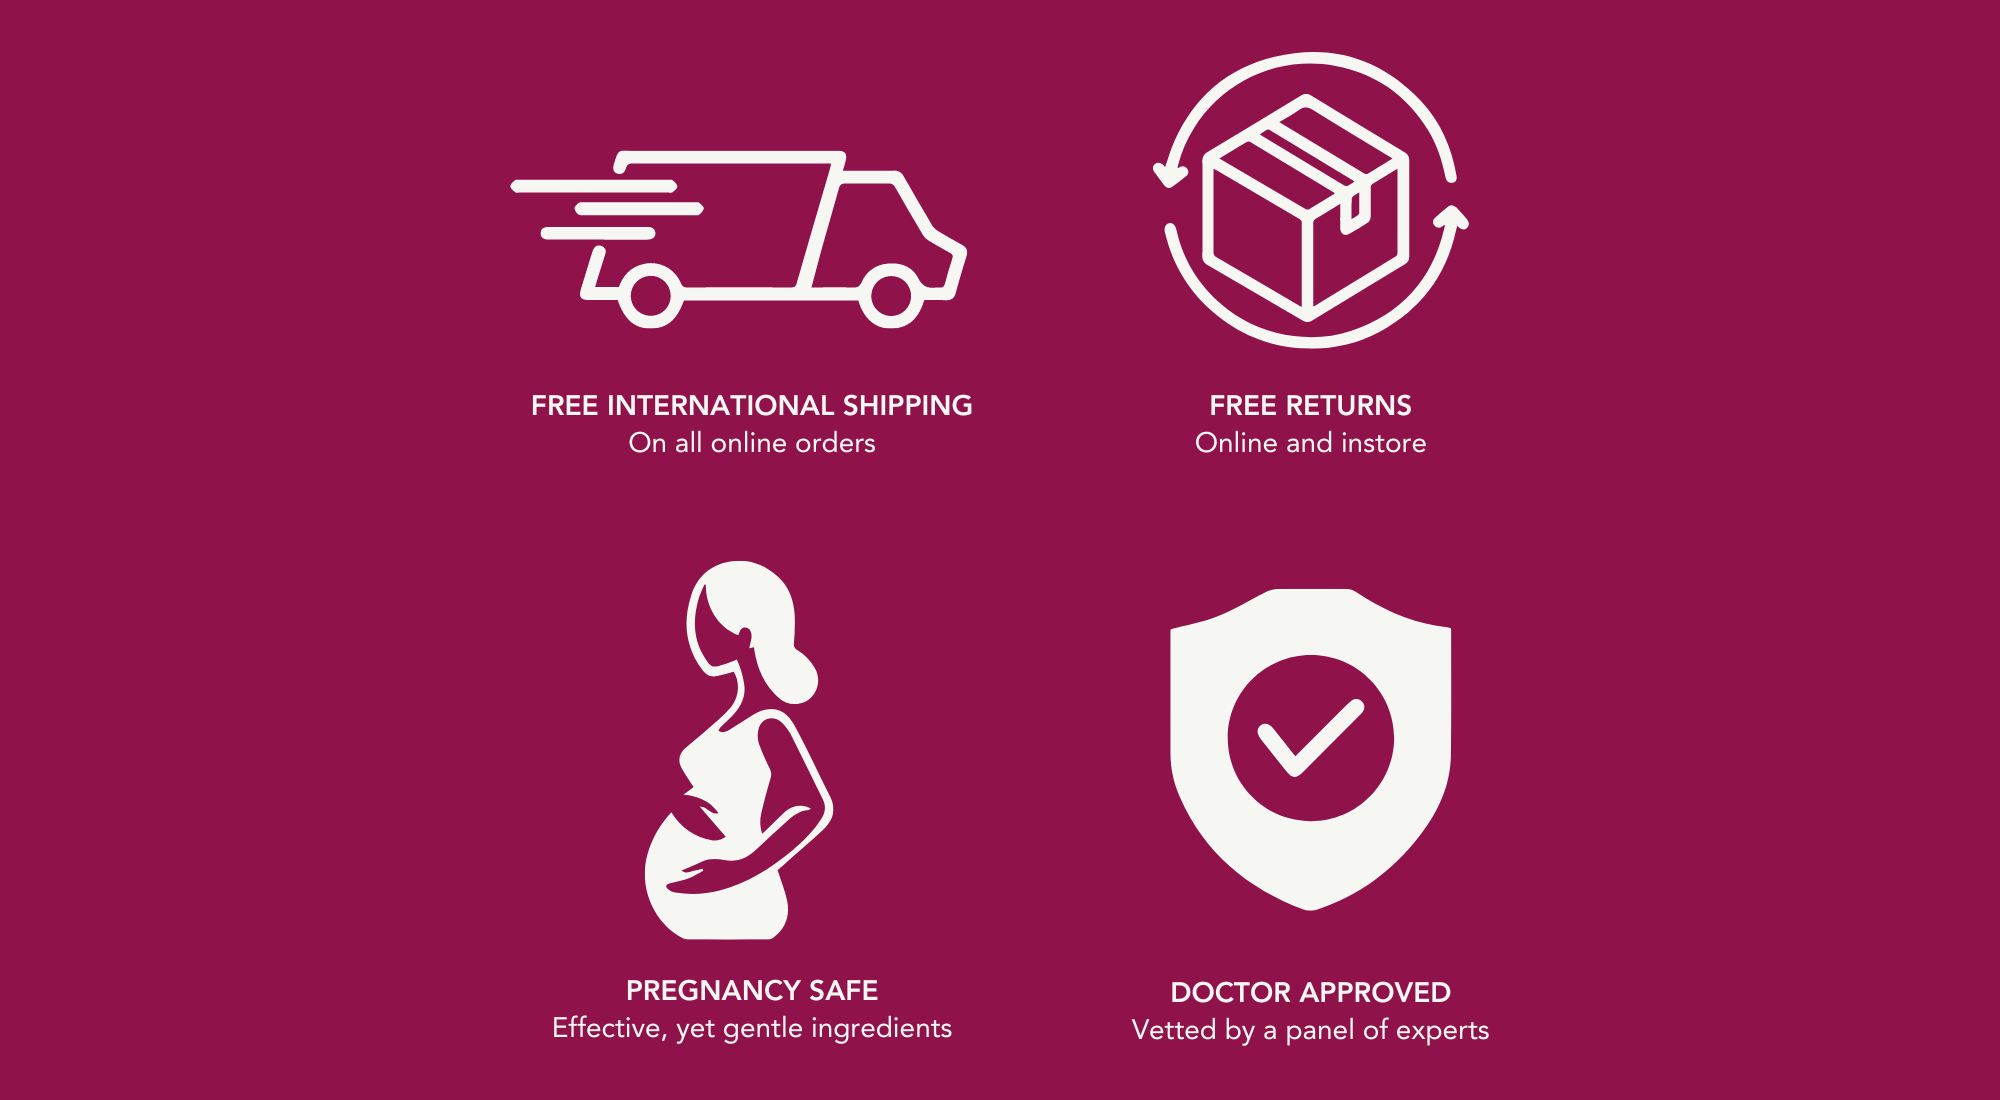 Free shipping and returns, pregnancy-safe, doctors-approved